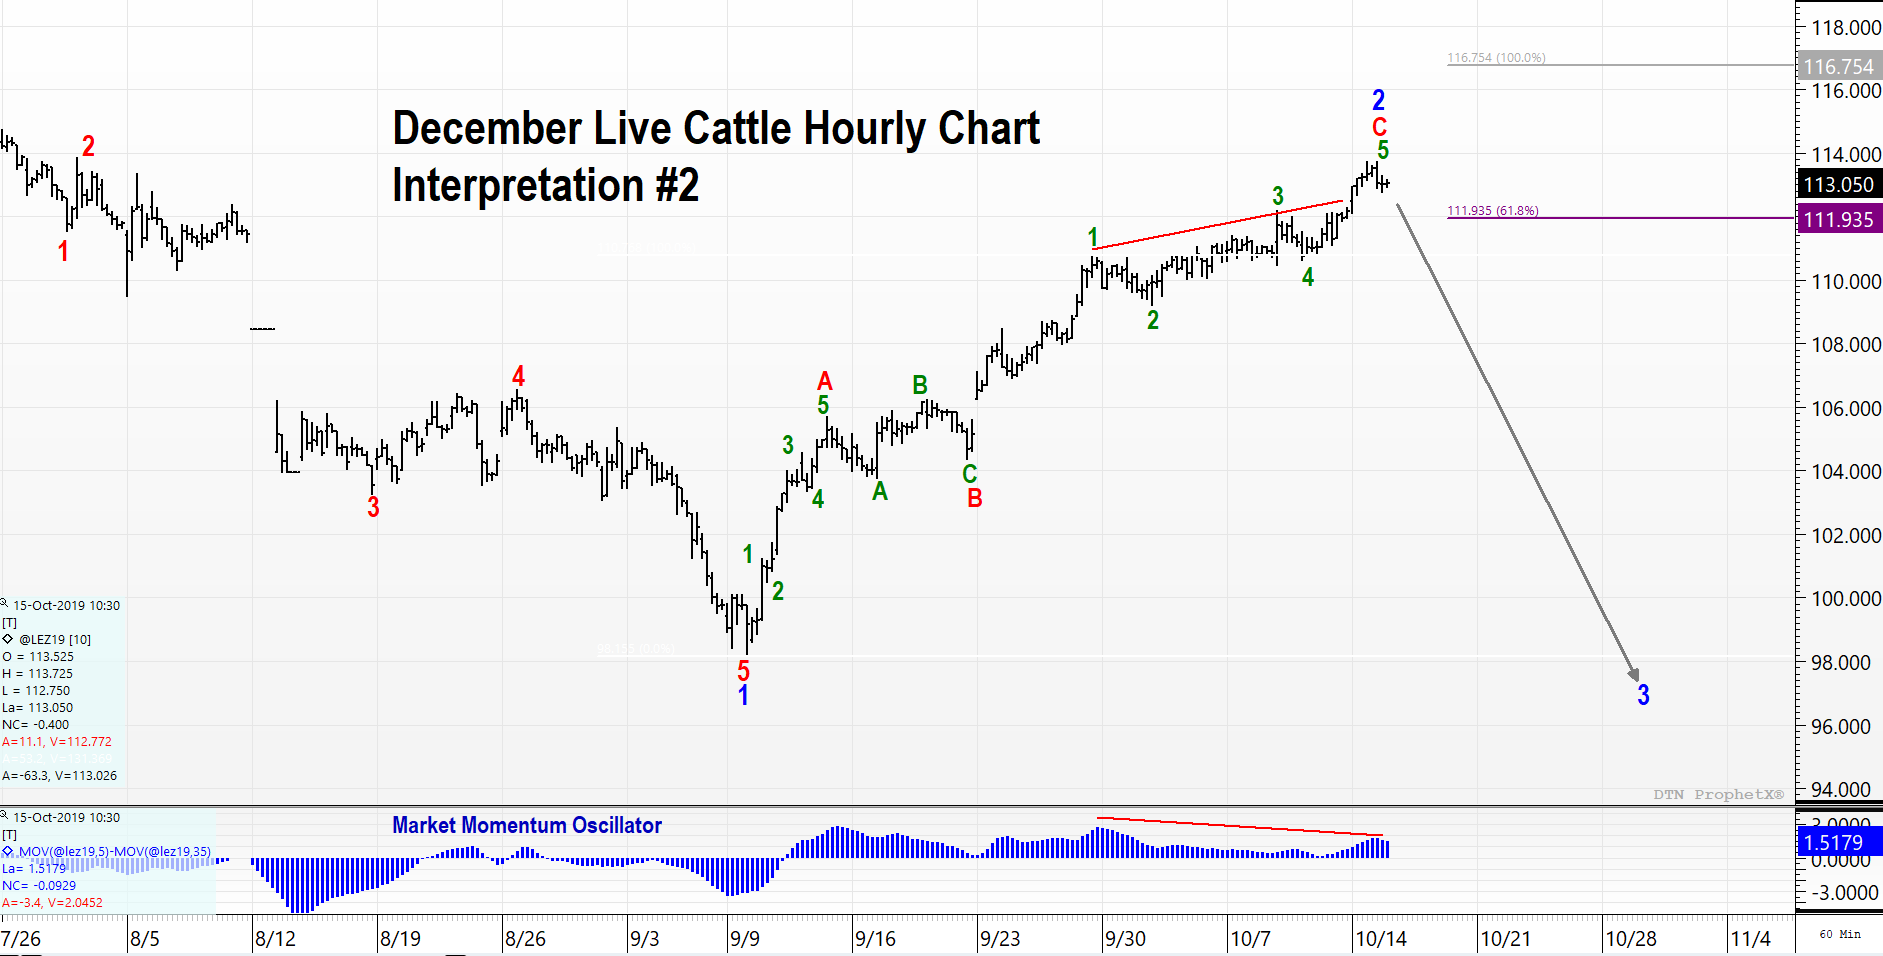 Elliott Wave Theory in Live Cattle Futures